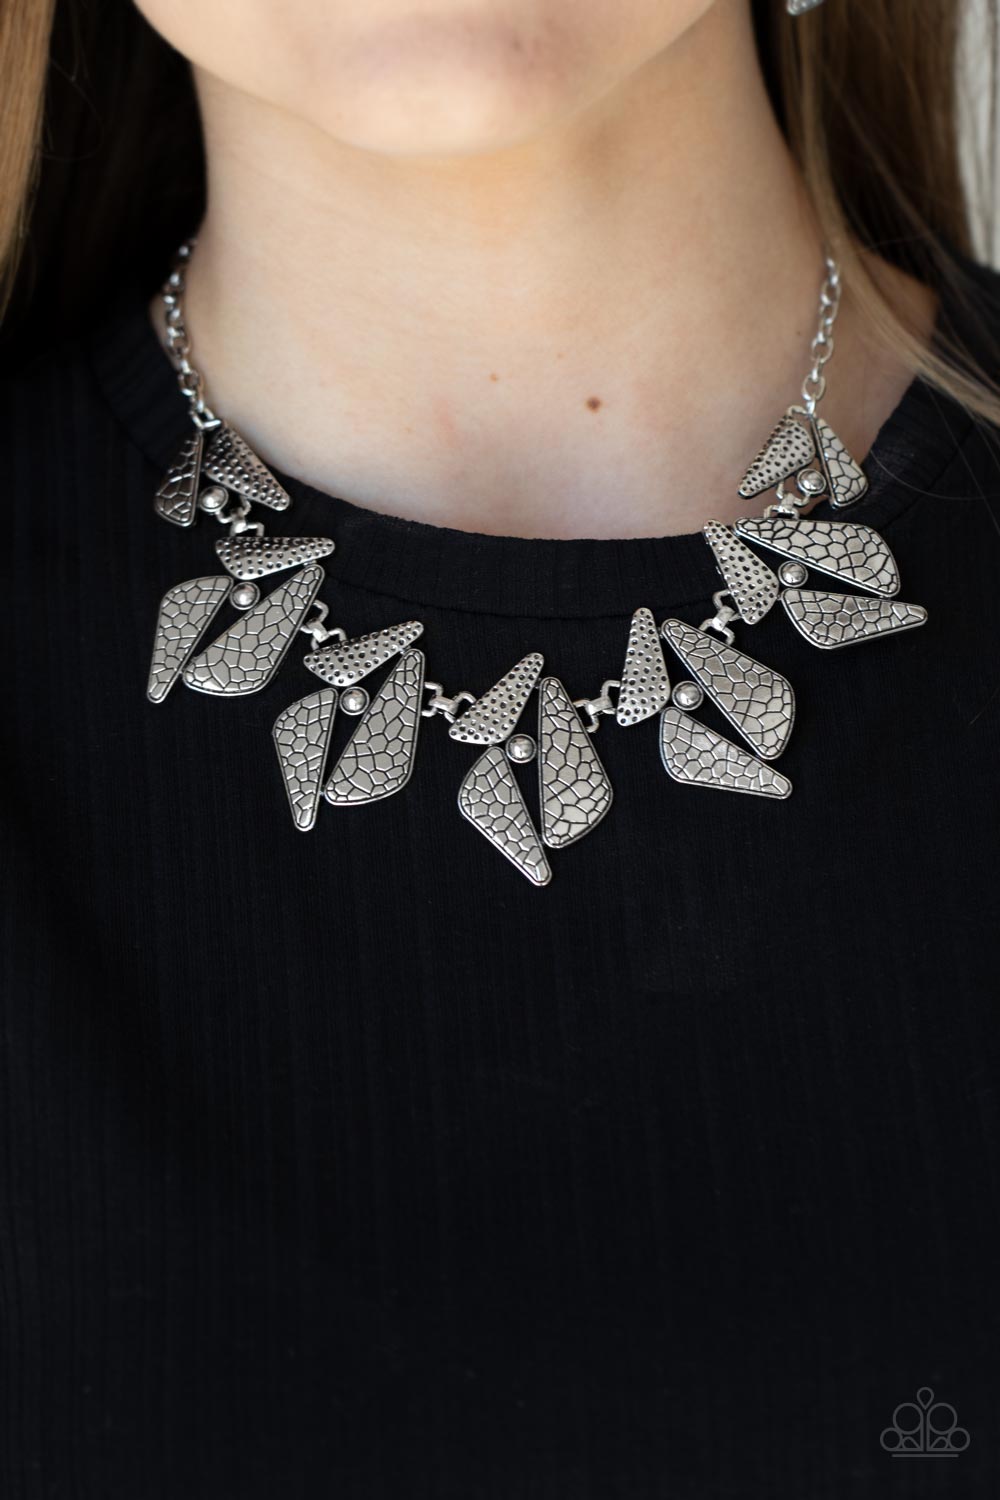 Extra Expedition Silver Necklace - Paparazzi Accessories- lightbox - CarasShop.com - $5 Jewelry by Cara Jewels